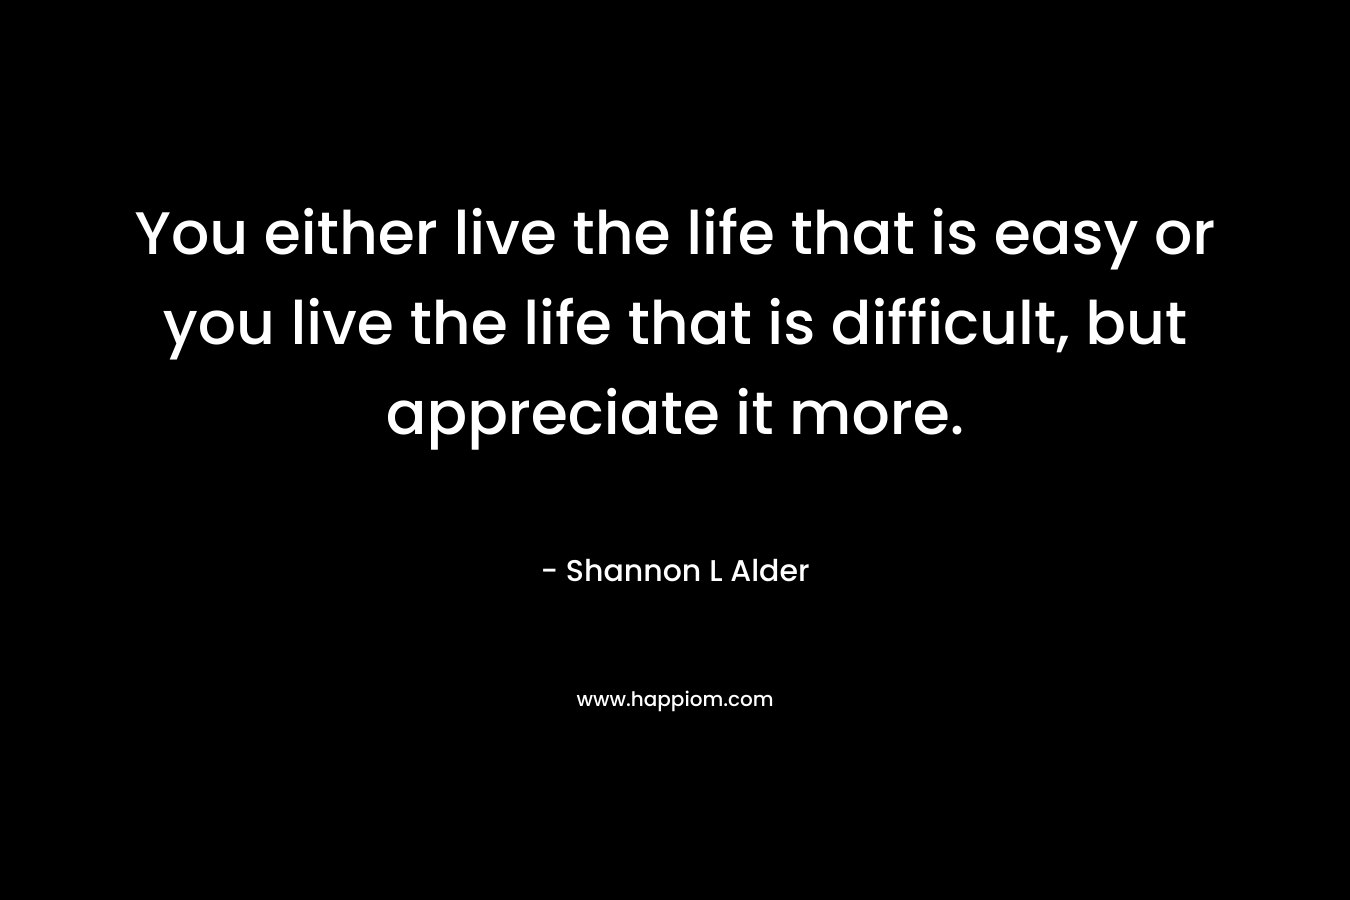 You either live the life that is easy or you live the life that is difficult, but appreciate it more.